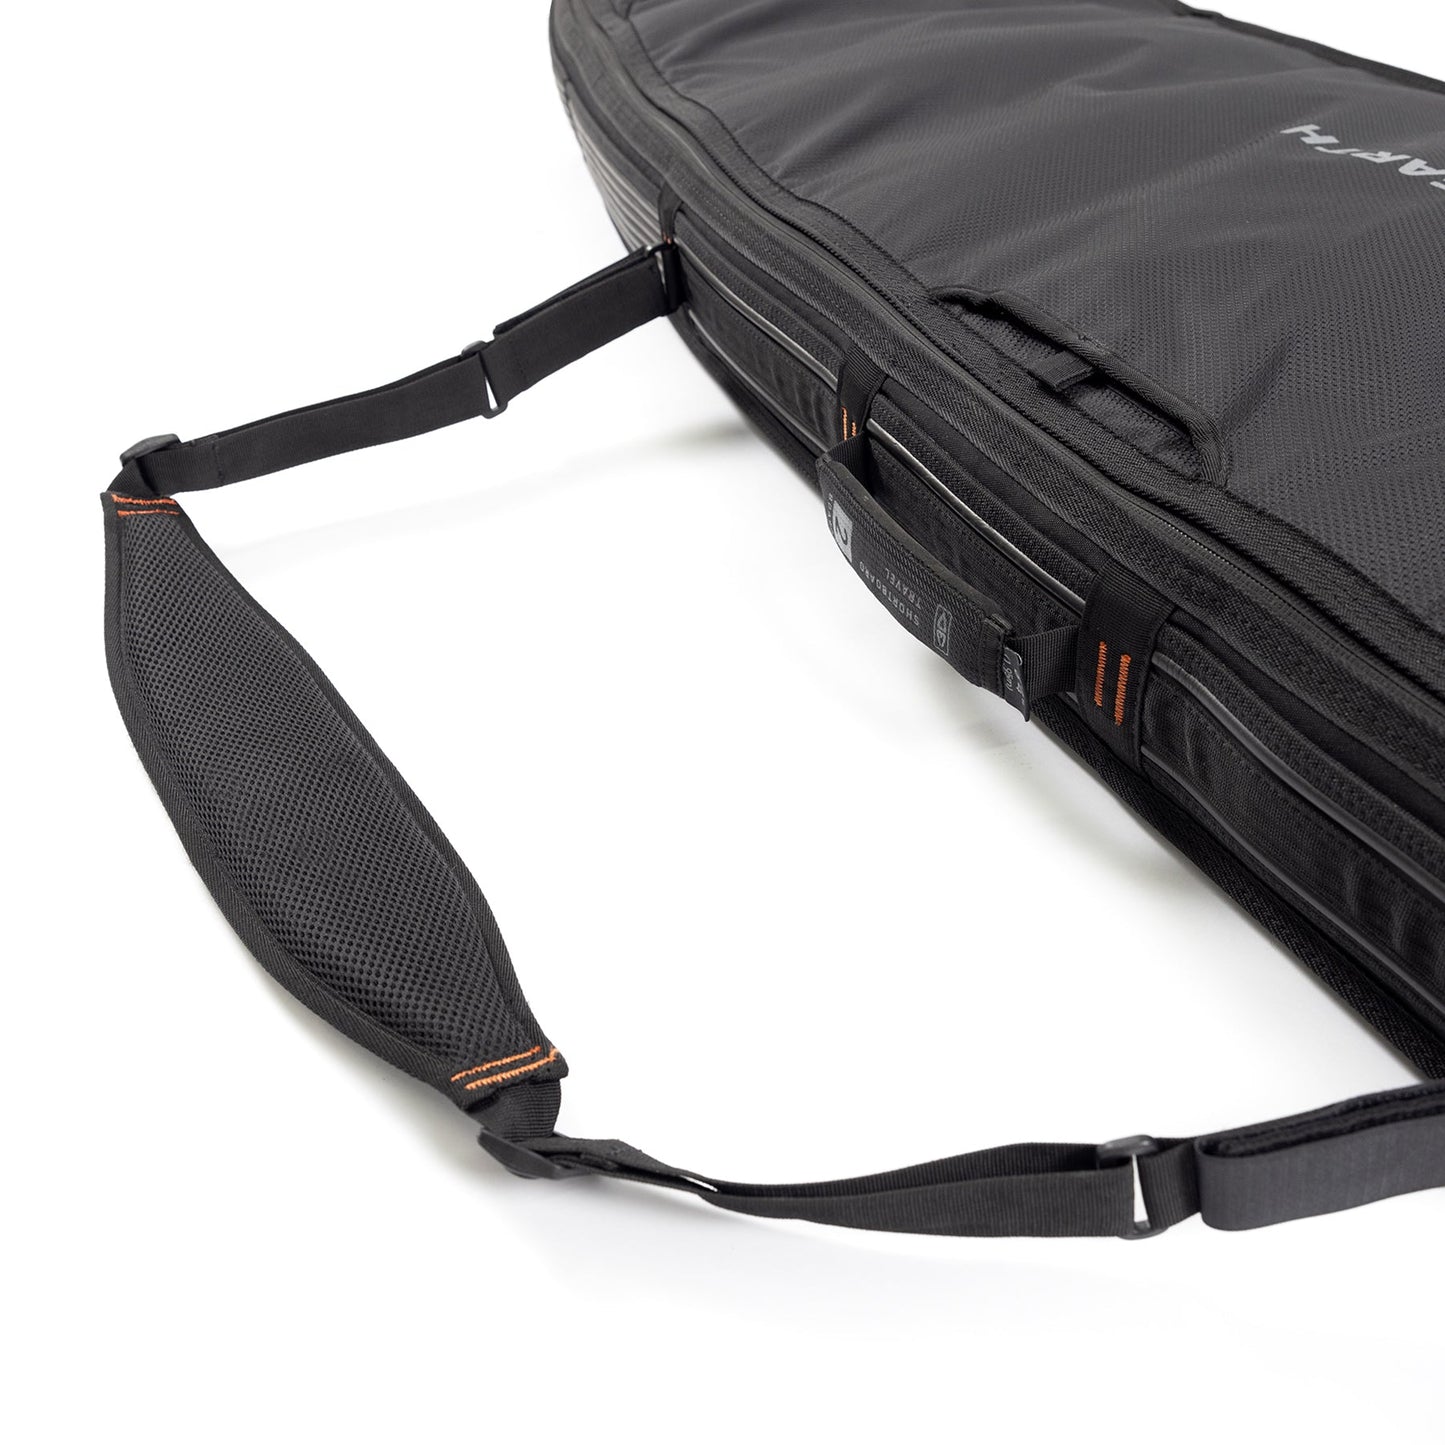 HYPA SHORTBOARD DOUBLE COVER